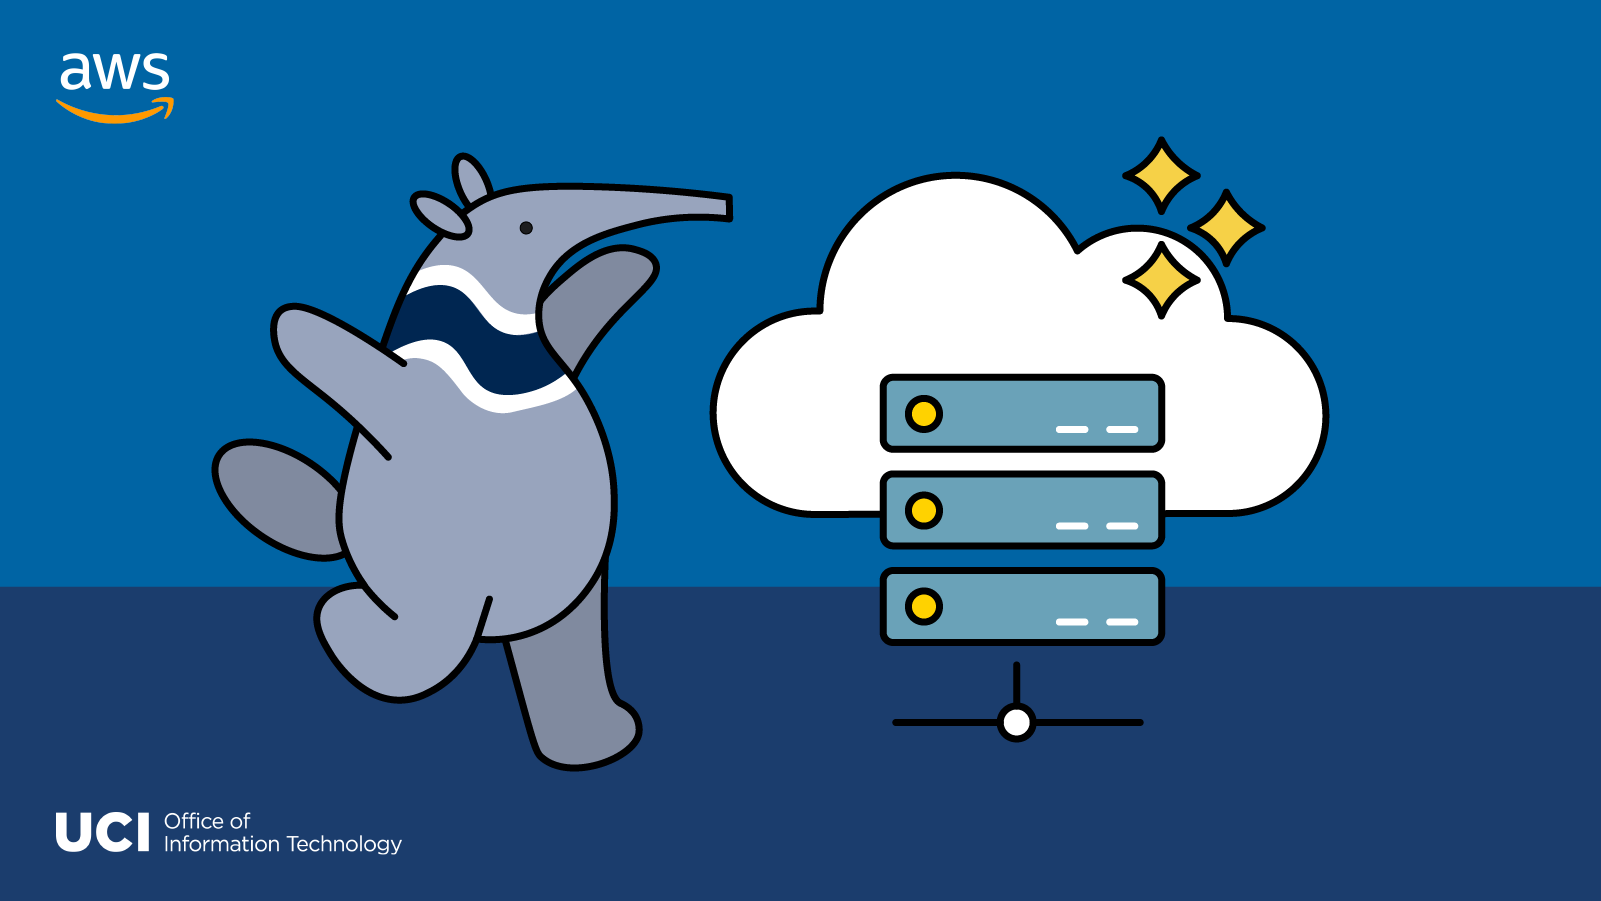 Peter the anteater standing next to some server stacks in the cloud.